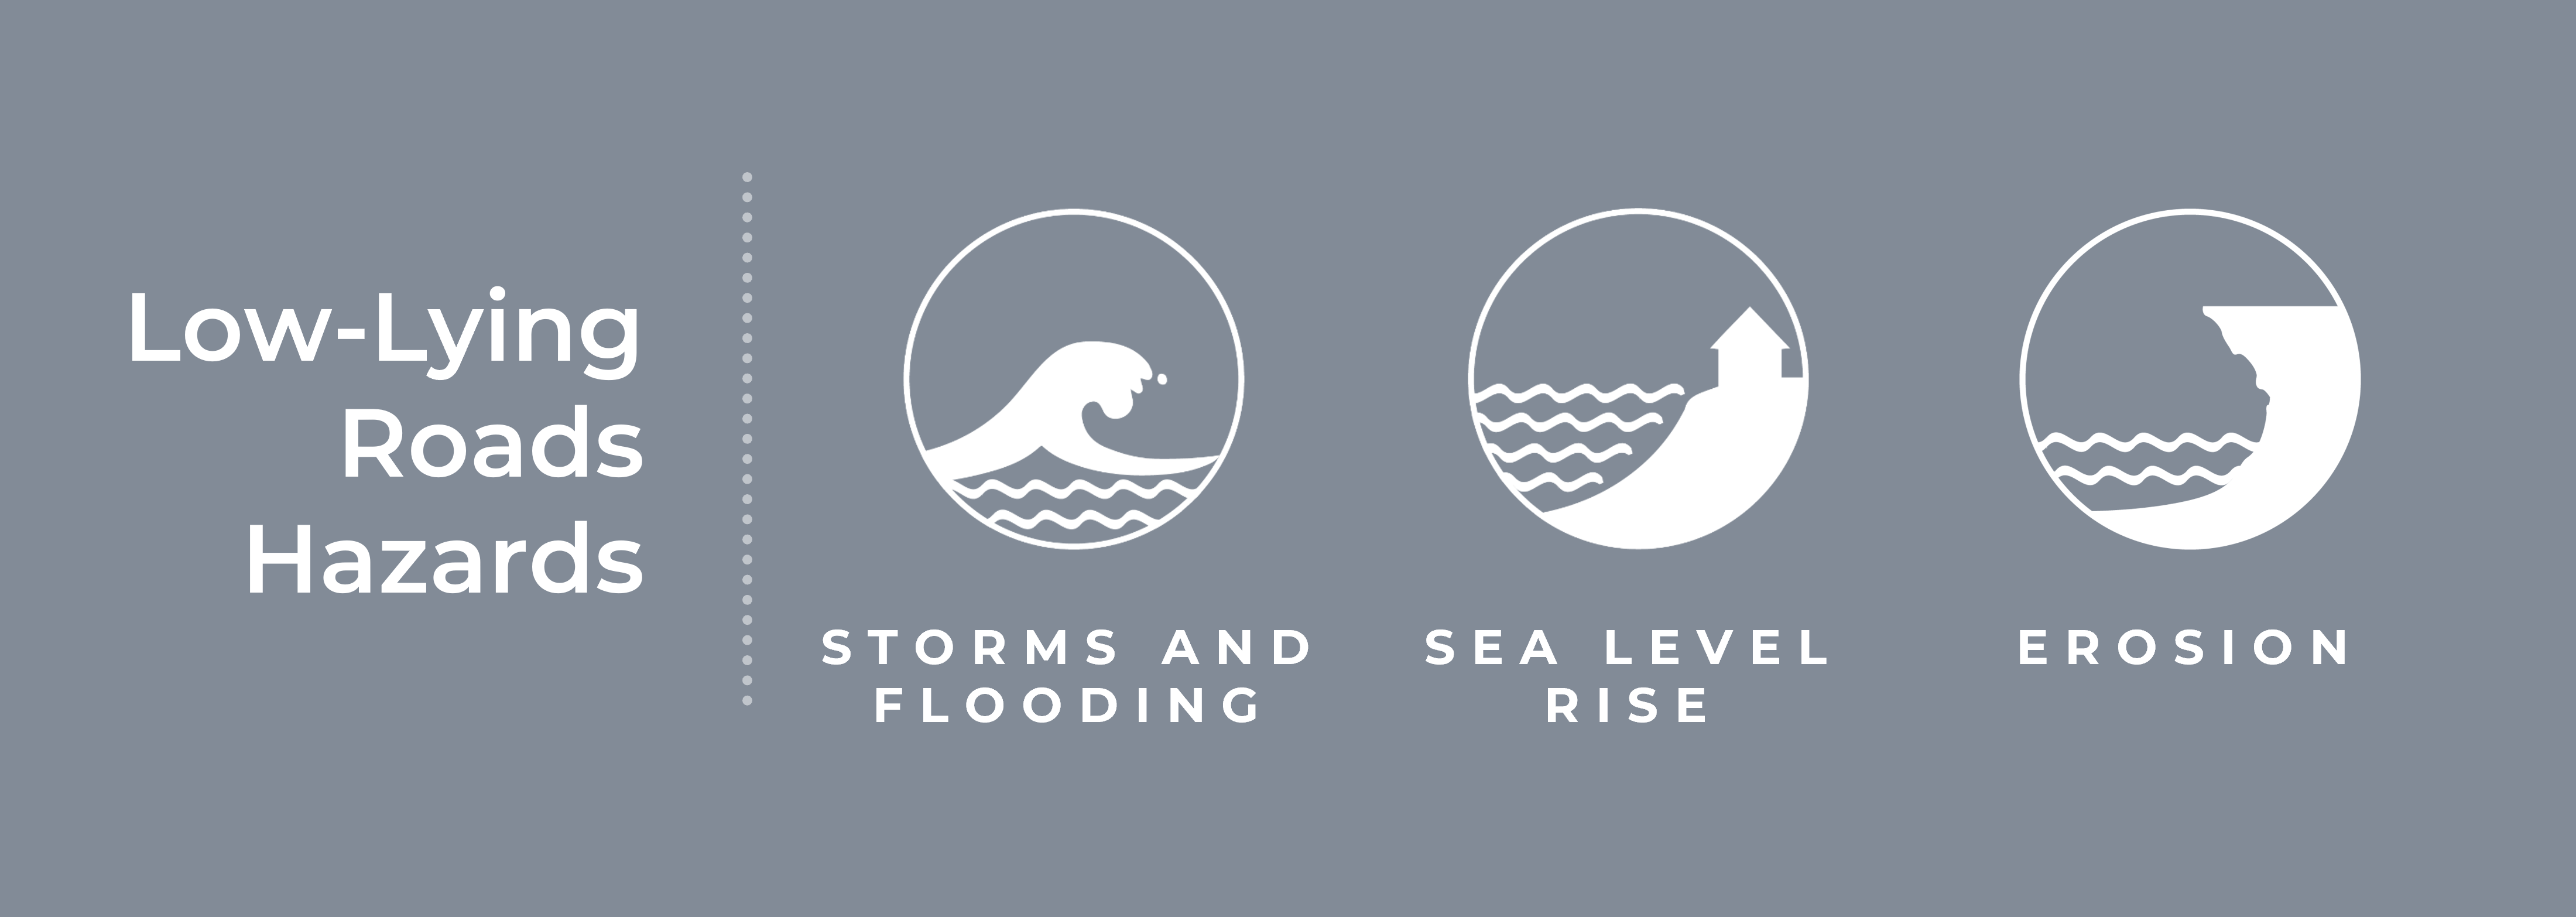 Low lying road hazards include storms and flooding, sea level rise, and erosion.